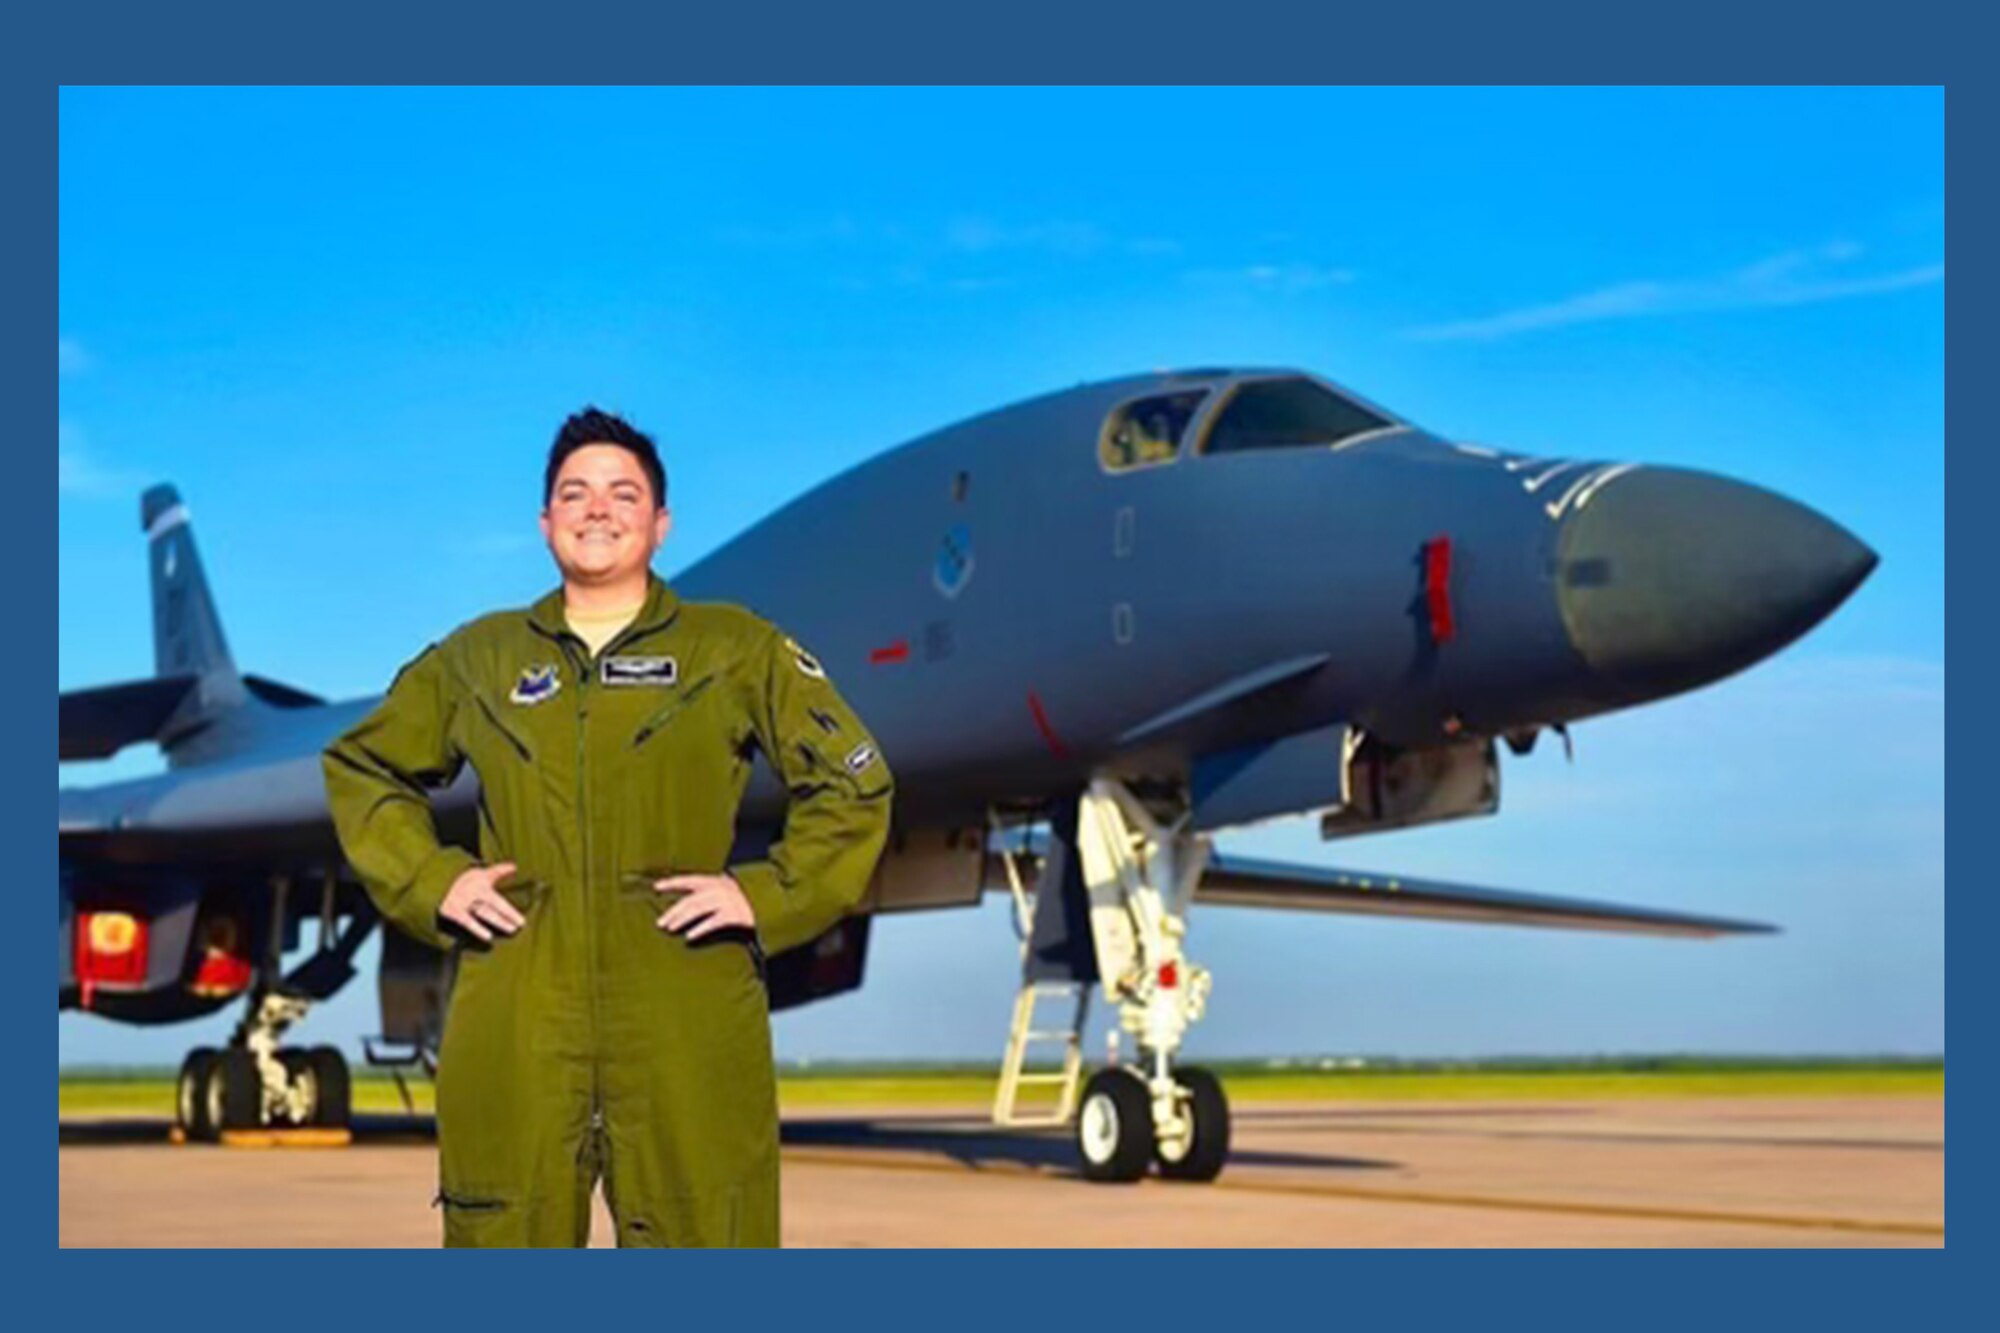 Maj. Thompson is currently an  instructor combat systems officer at the 479th Flying Training Group at Naval Air Station-Pensacola, Florida.